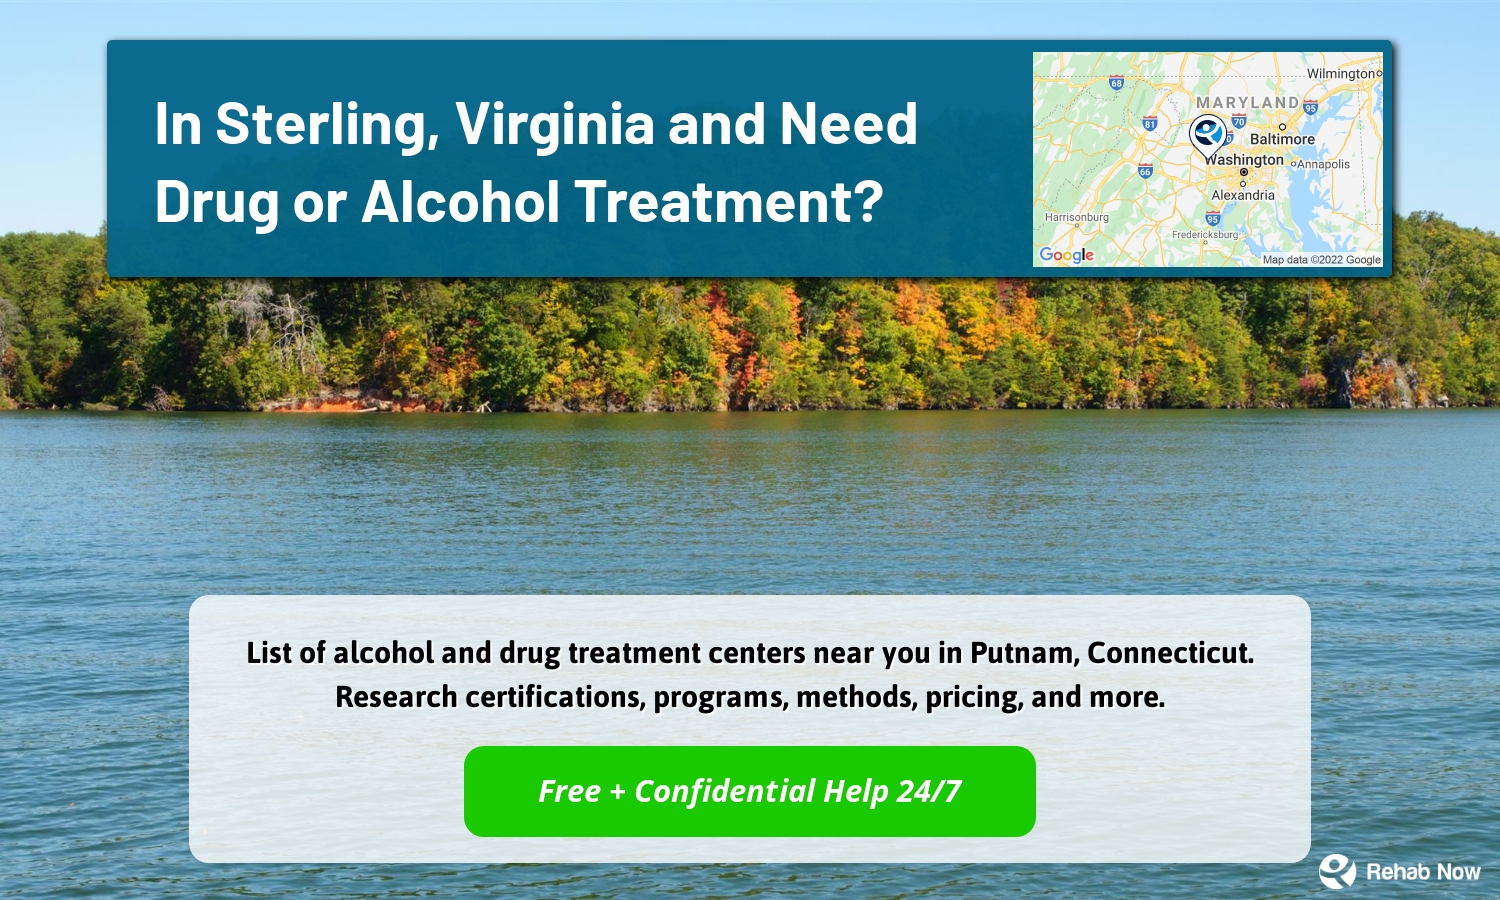 List of alcohol and drug treatment centers near you in Putnam, Connecticut. Research certifications, programs, methods, pricing, and more.